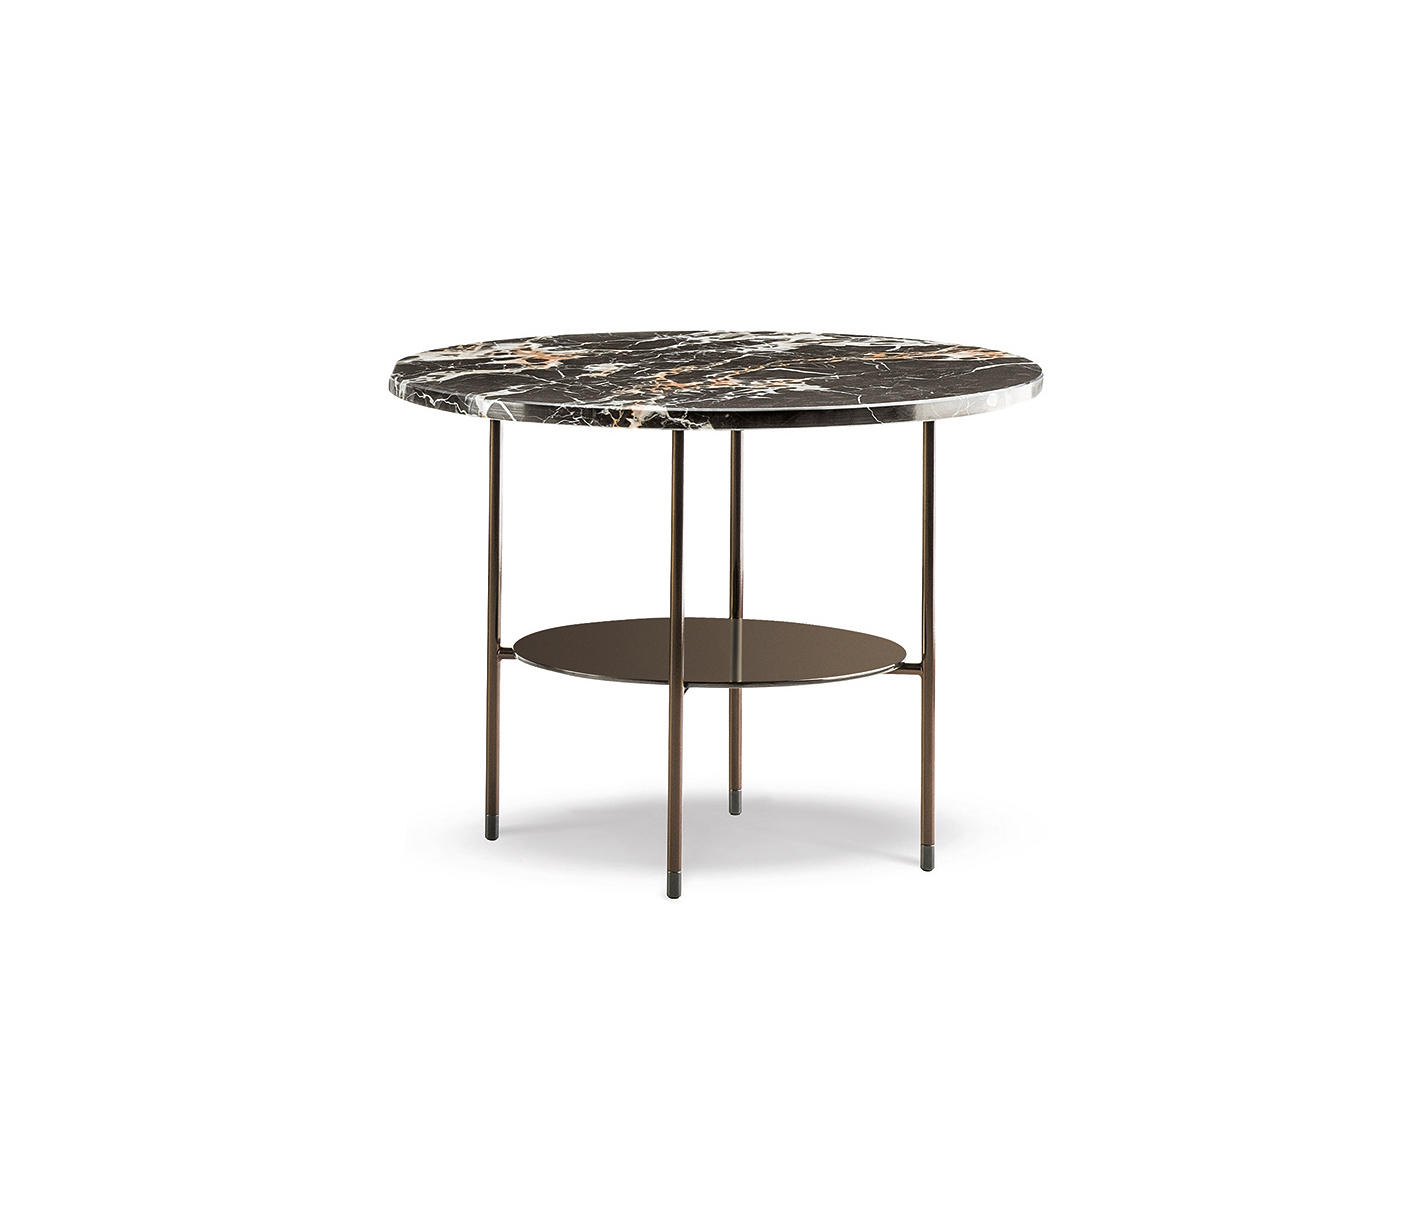 LELONG 23 - Side tables from Minotti | Architonic